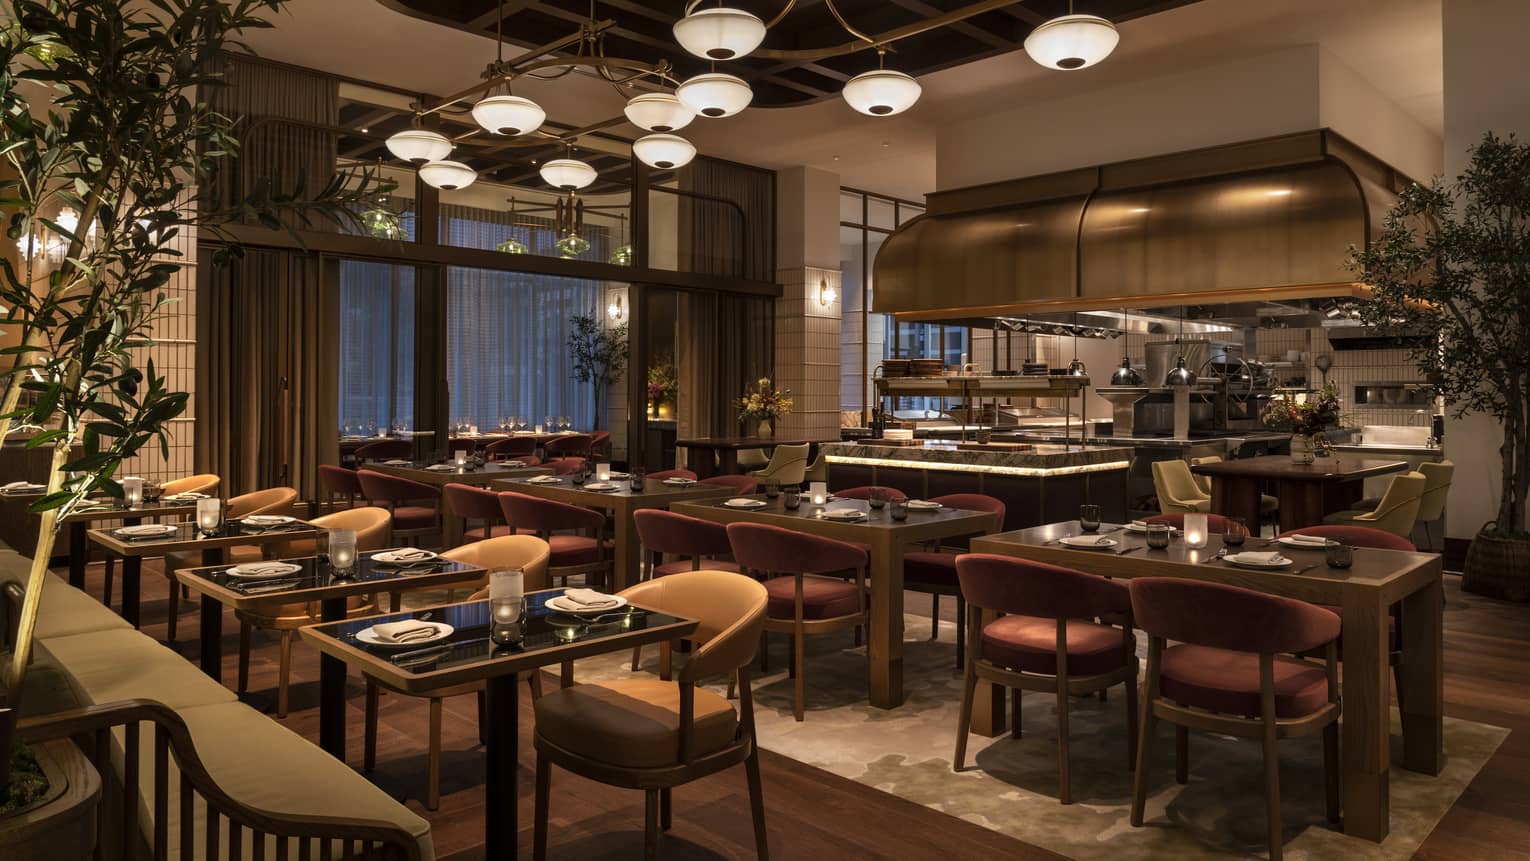 A dining outlet that is dimly lit with brown wooden chairs, tables and an open kitchen.